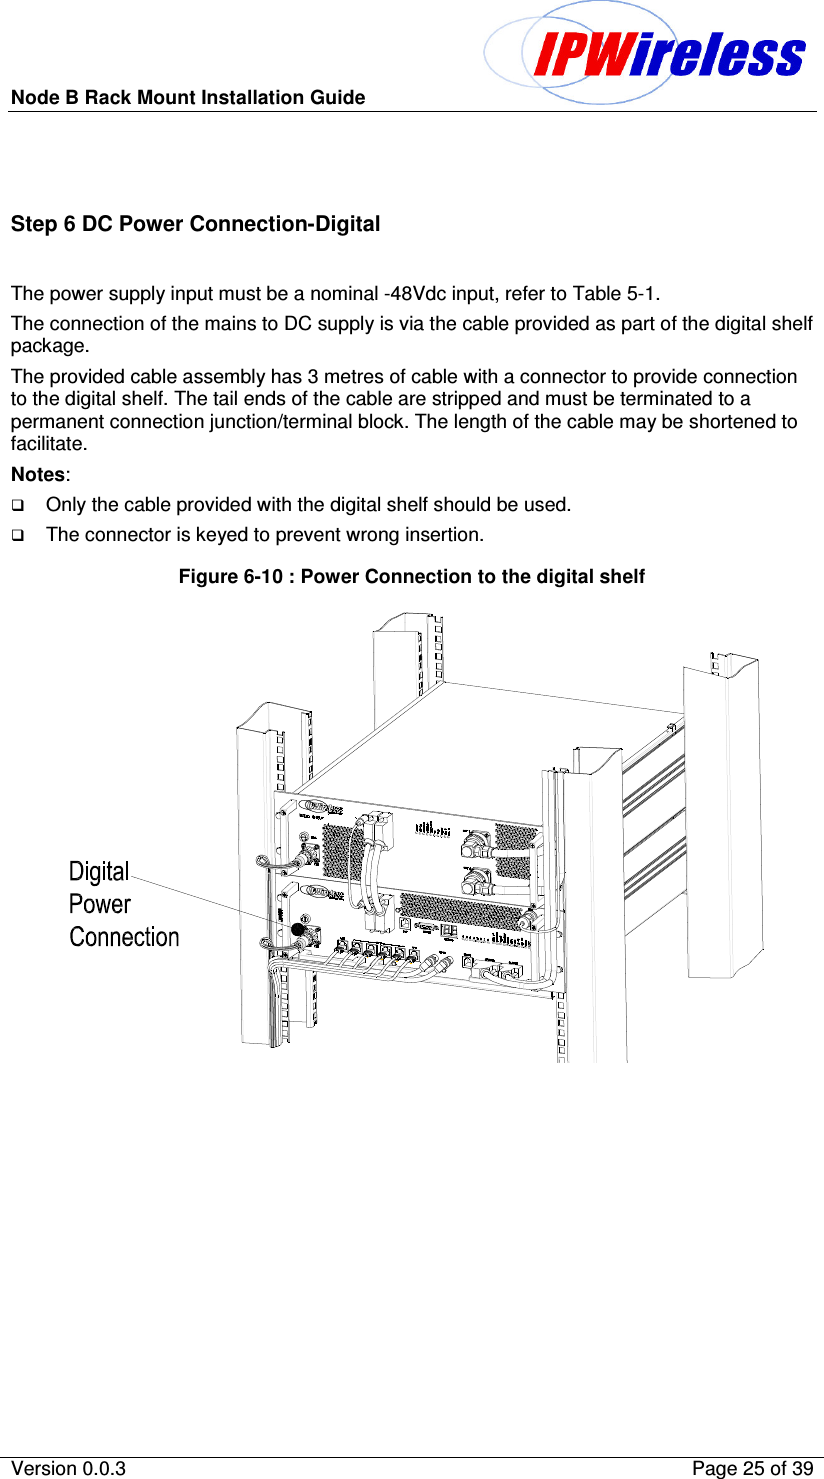 Node B Rack Mount Installation Guide                          Version 0.0.3    Page 25 of 39   Step 6 DC Power Connection-Digital  The power supply input must be a nominal -48Vdc input, refer to Table 5-1. The connection of the mains to DC supply is via the cable provided as part of the digital shelf package. The provided cable assembly has 3 metres of cable with a connector to provide connection to the digital shelf. The tail ends of the cable are stripped and must be terminated to a permanent connection junction/terminal block. The length of the cable may be shortened to facilitate. Notes:  Only the cable provided with the digital shelf should be used. The connector is keyed to prevent wrong insertion. Figure 6-10 : Power Connection to the digital shelf    